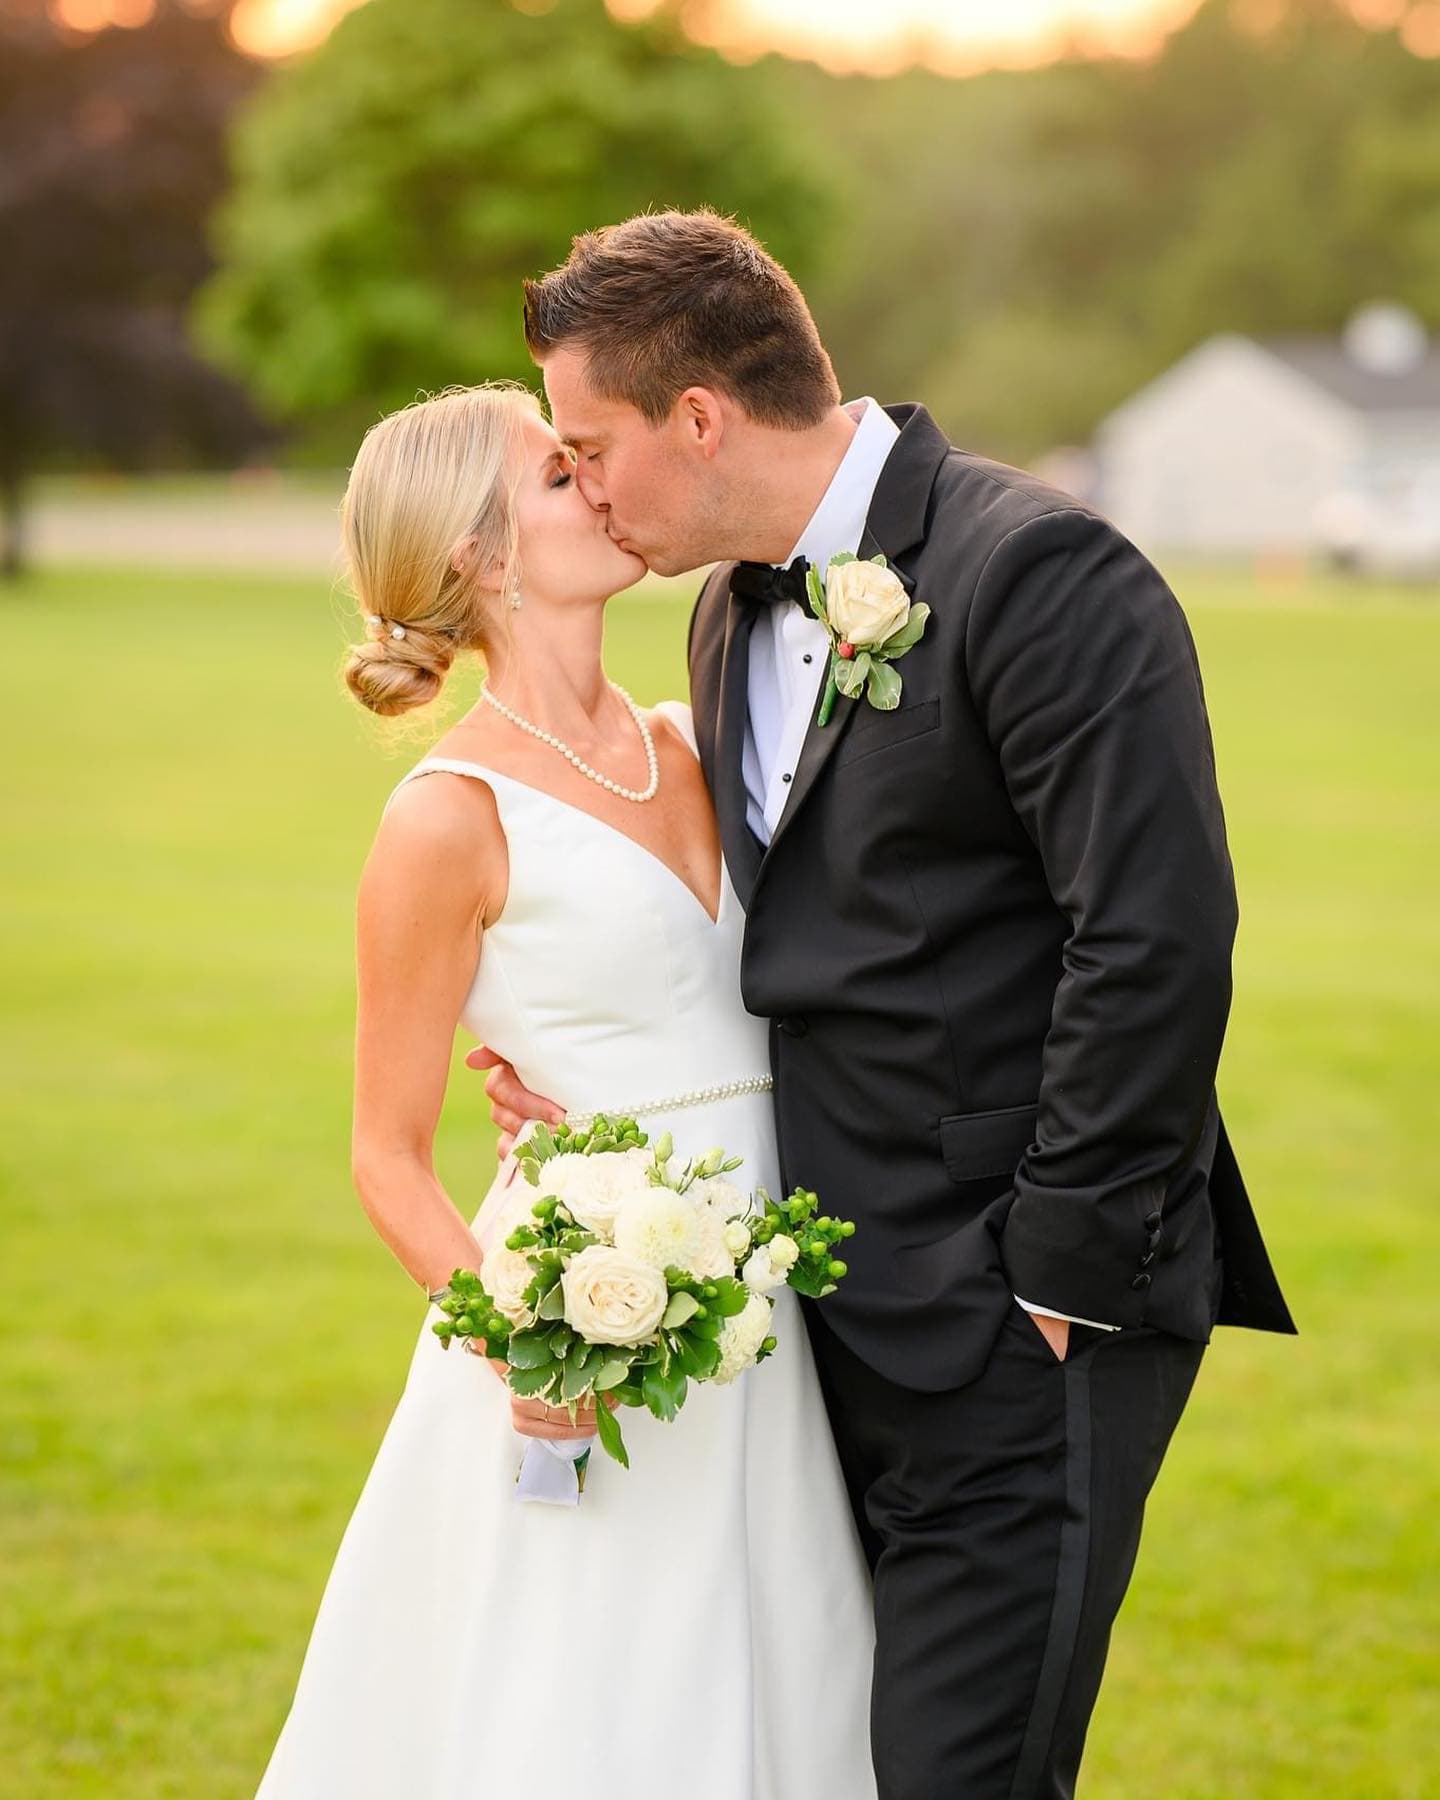 A Whimsical Wedding Day at Great Island Commons: Madeline & Brendan's Story